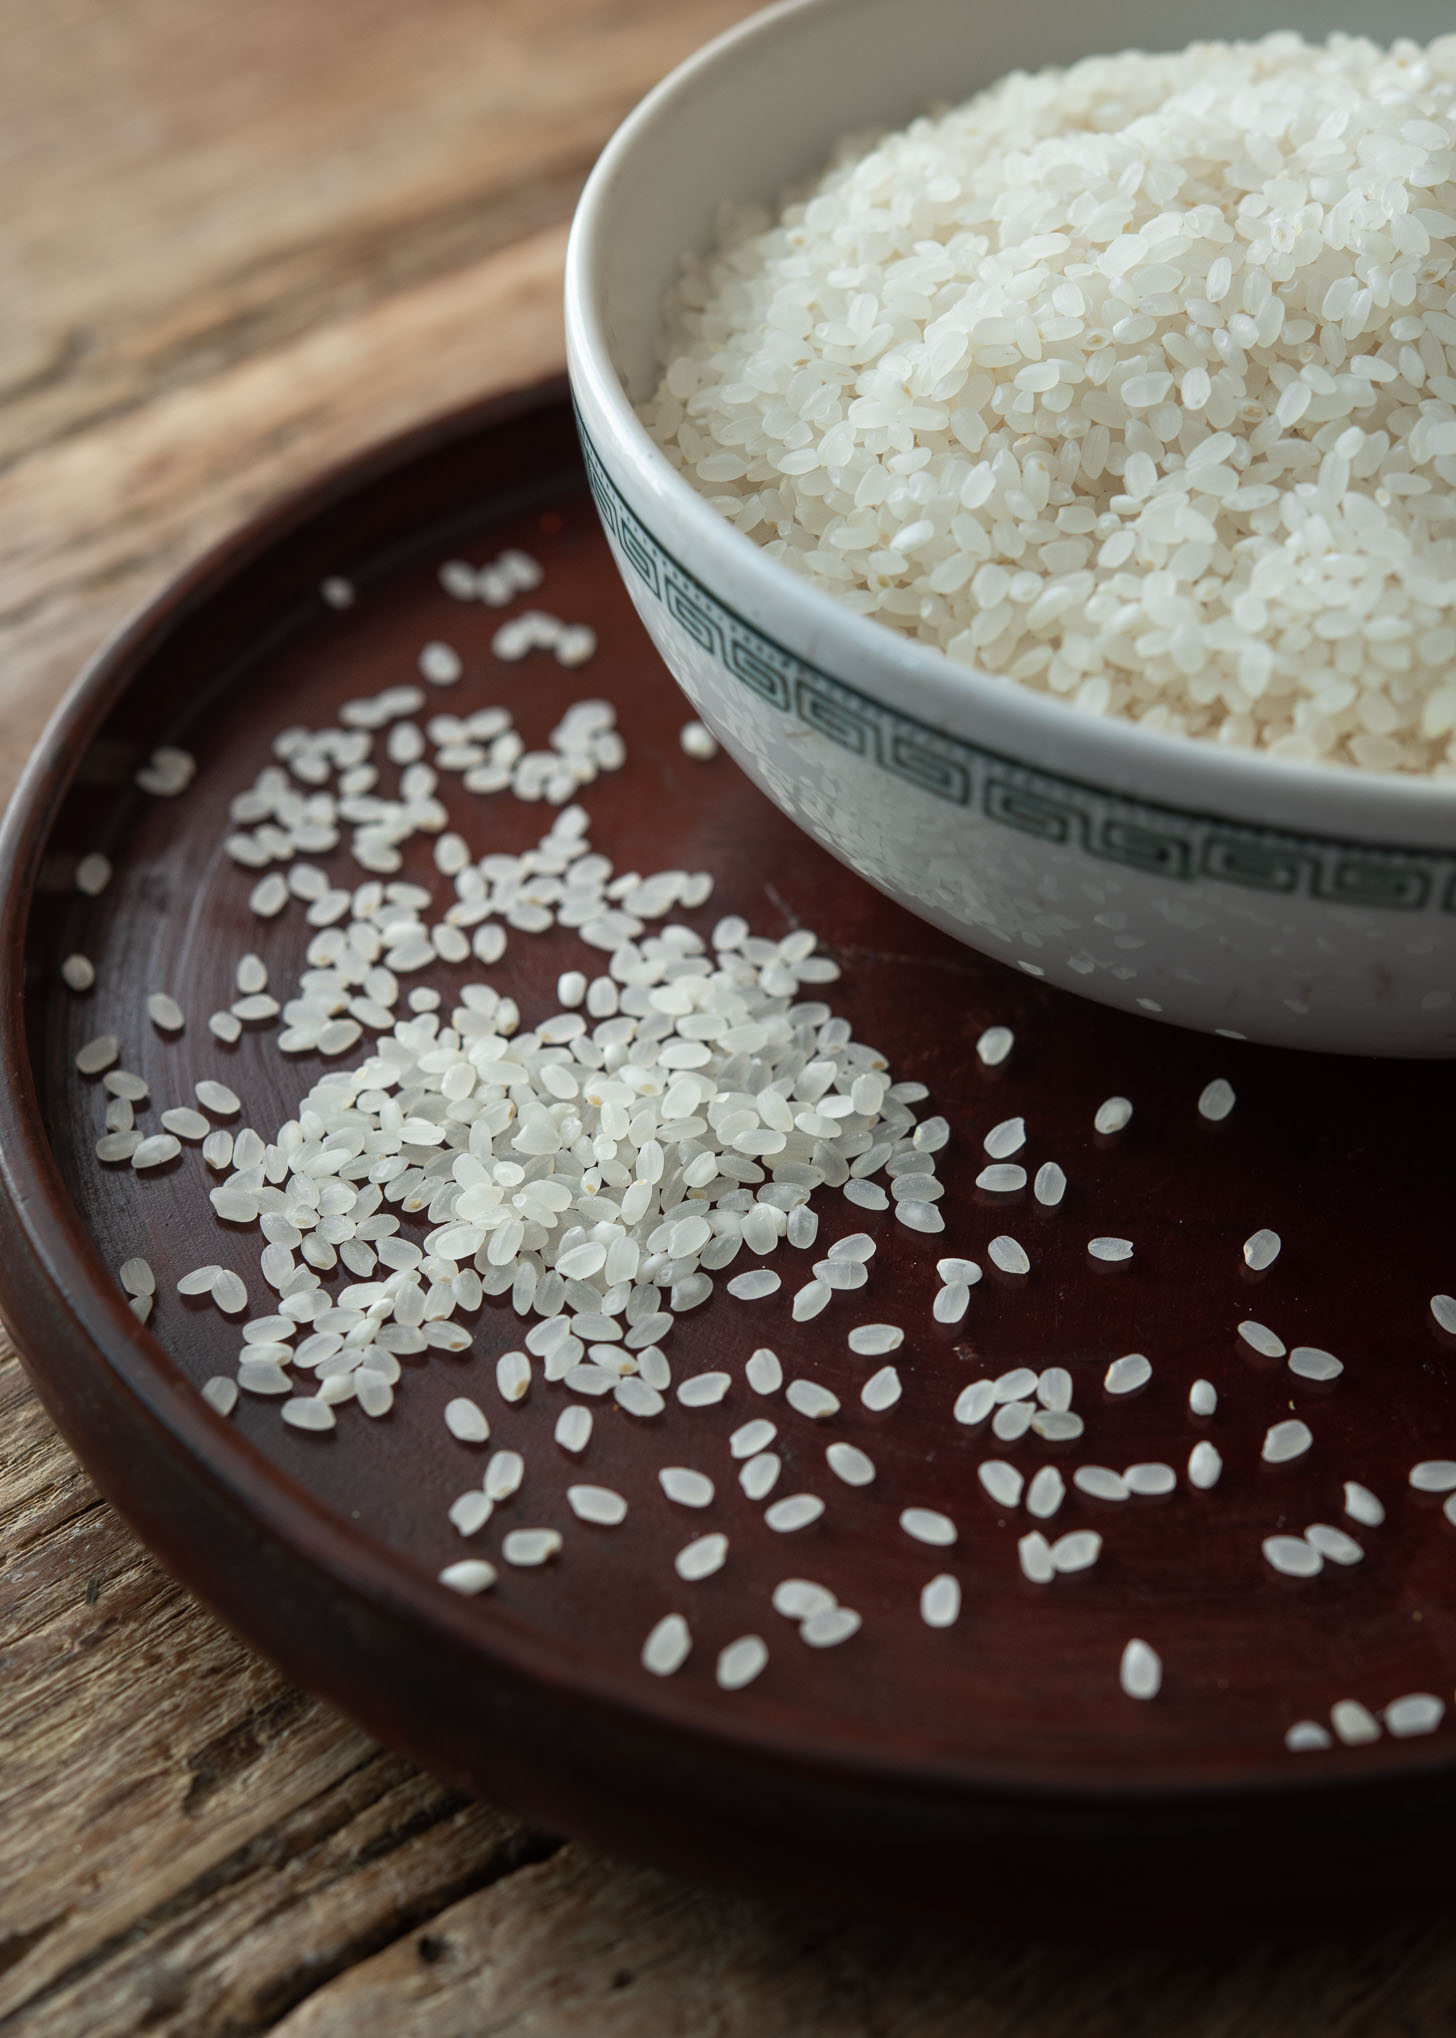 A bowl of short grain rice (Korean rice) next to the scattered white rice grains.